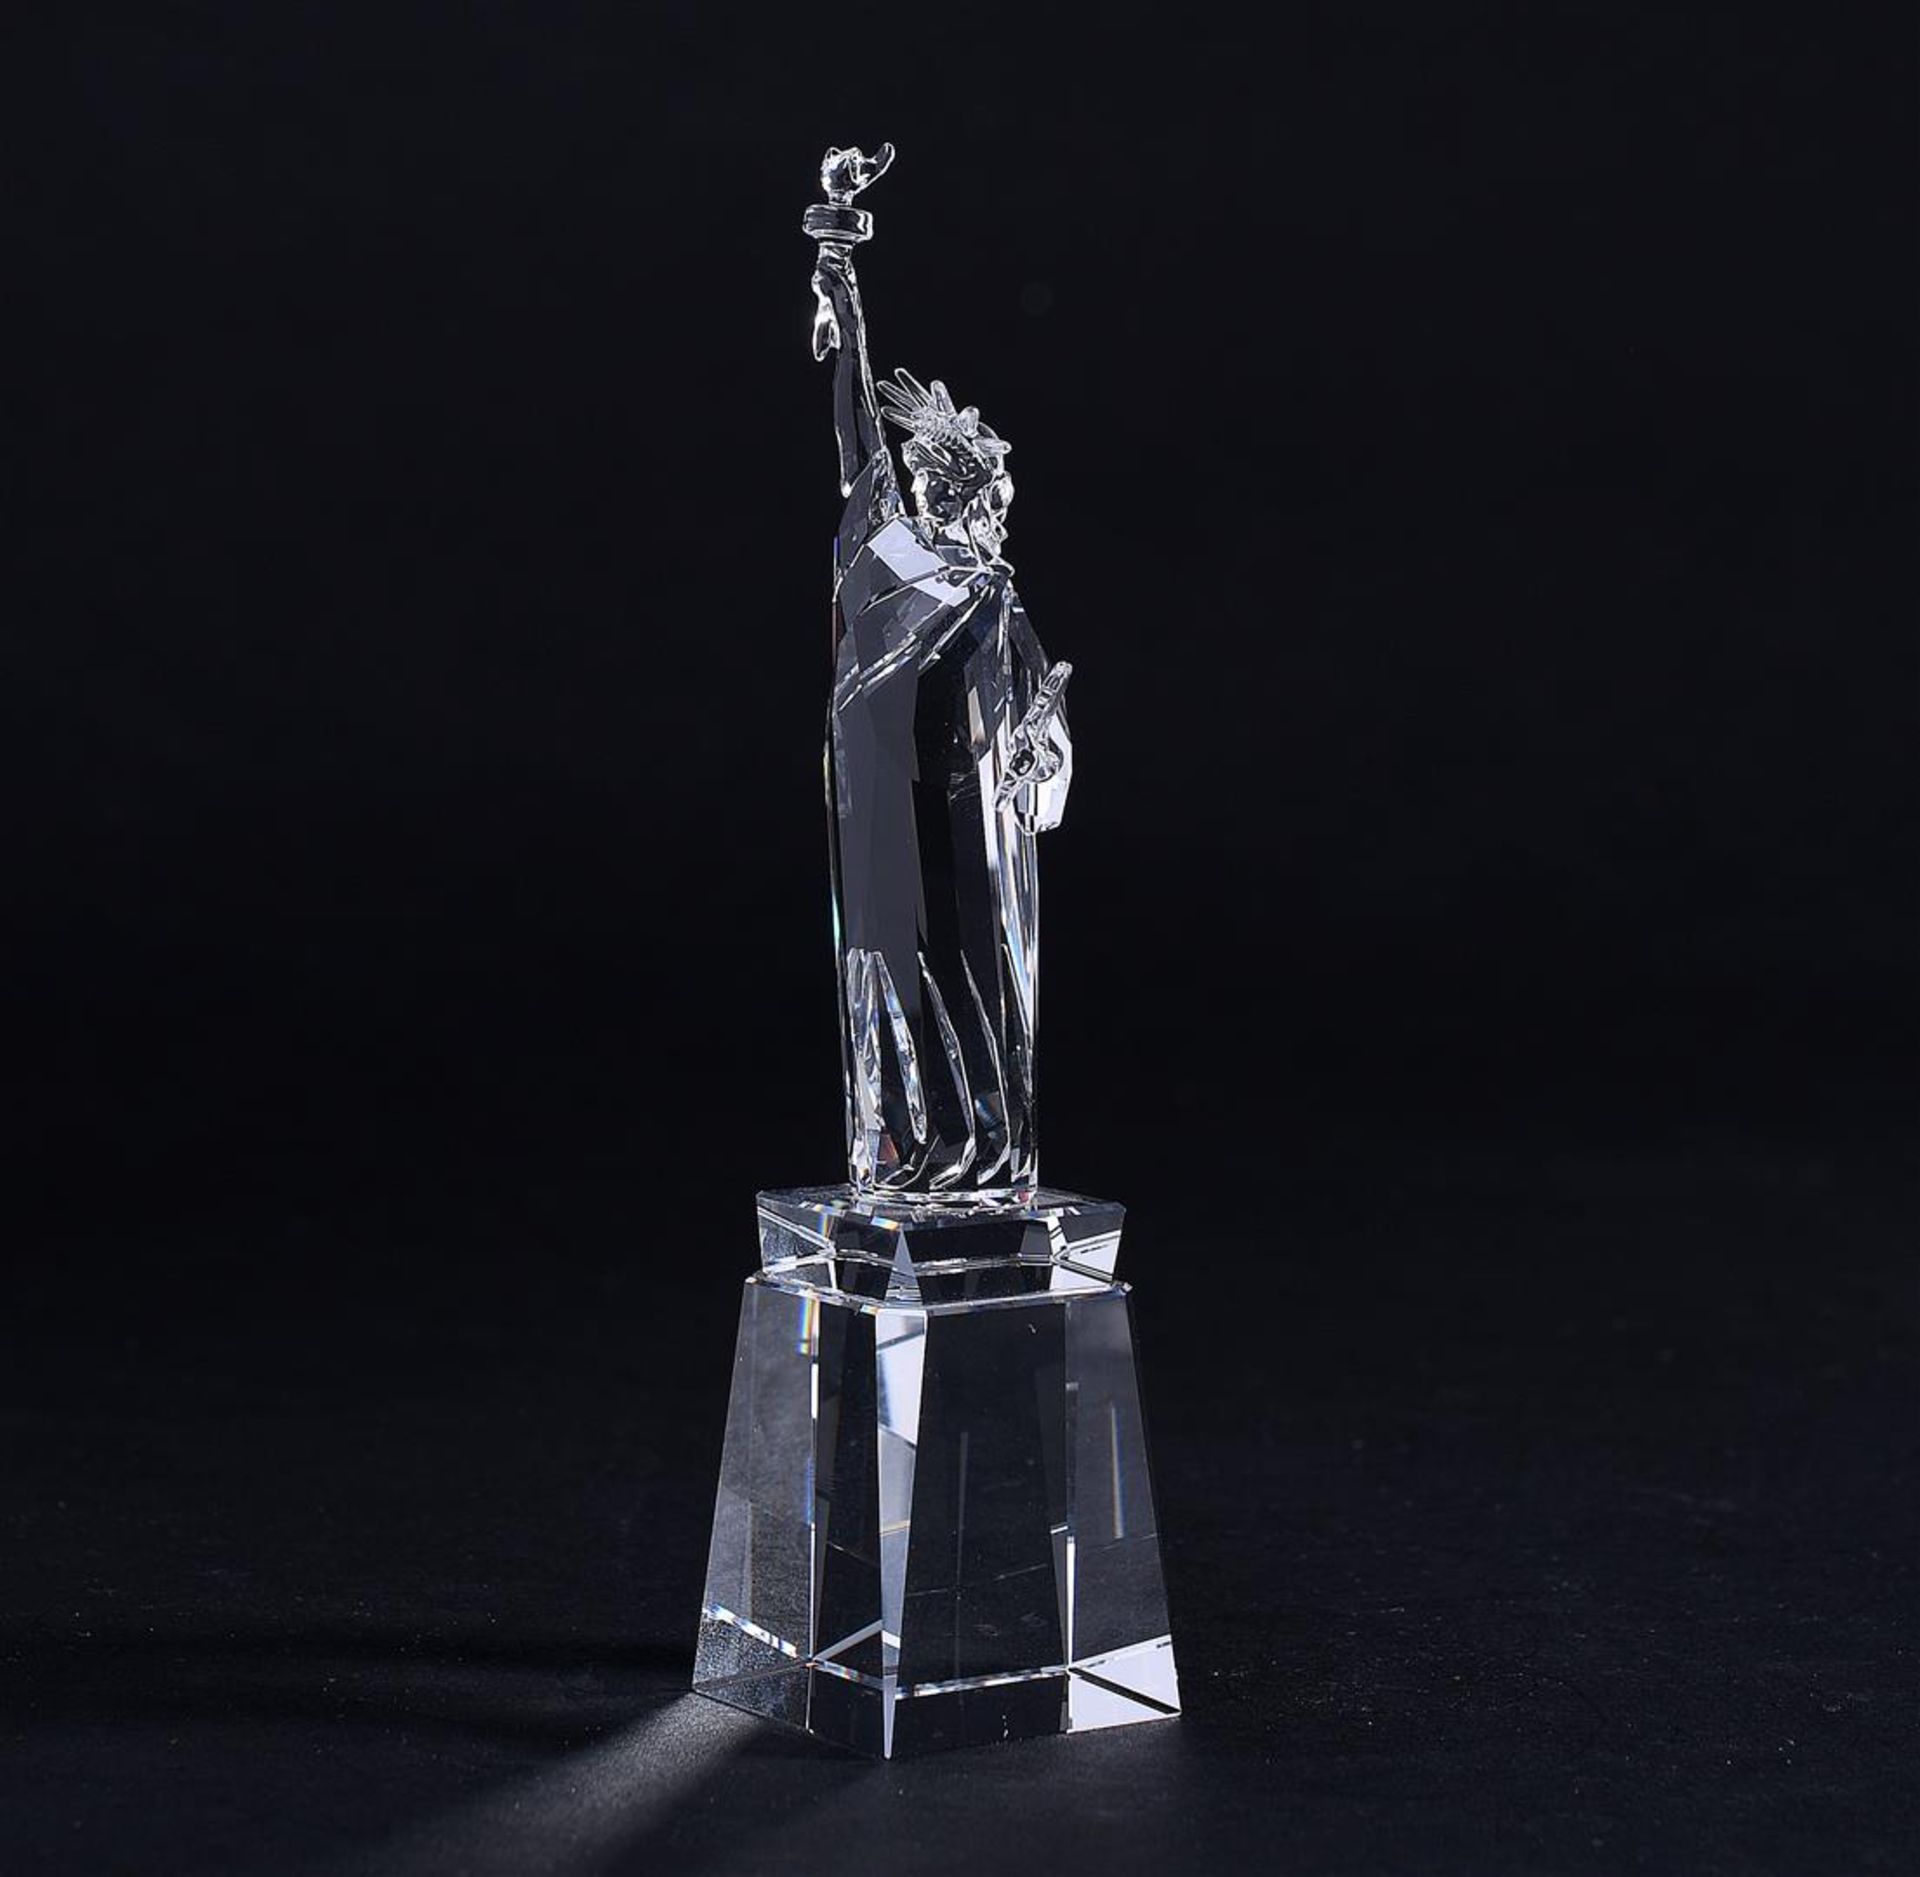 Swarovski, Statue of Liberty Year of issue 2019, 5428011. Includes original box.
3.1 x 3.1 x 13.6 cm - Image 2 of 4